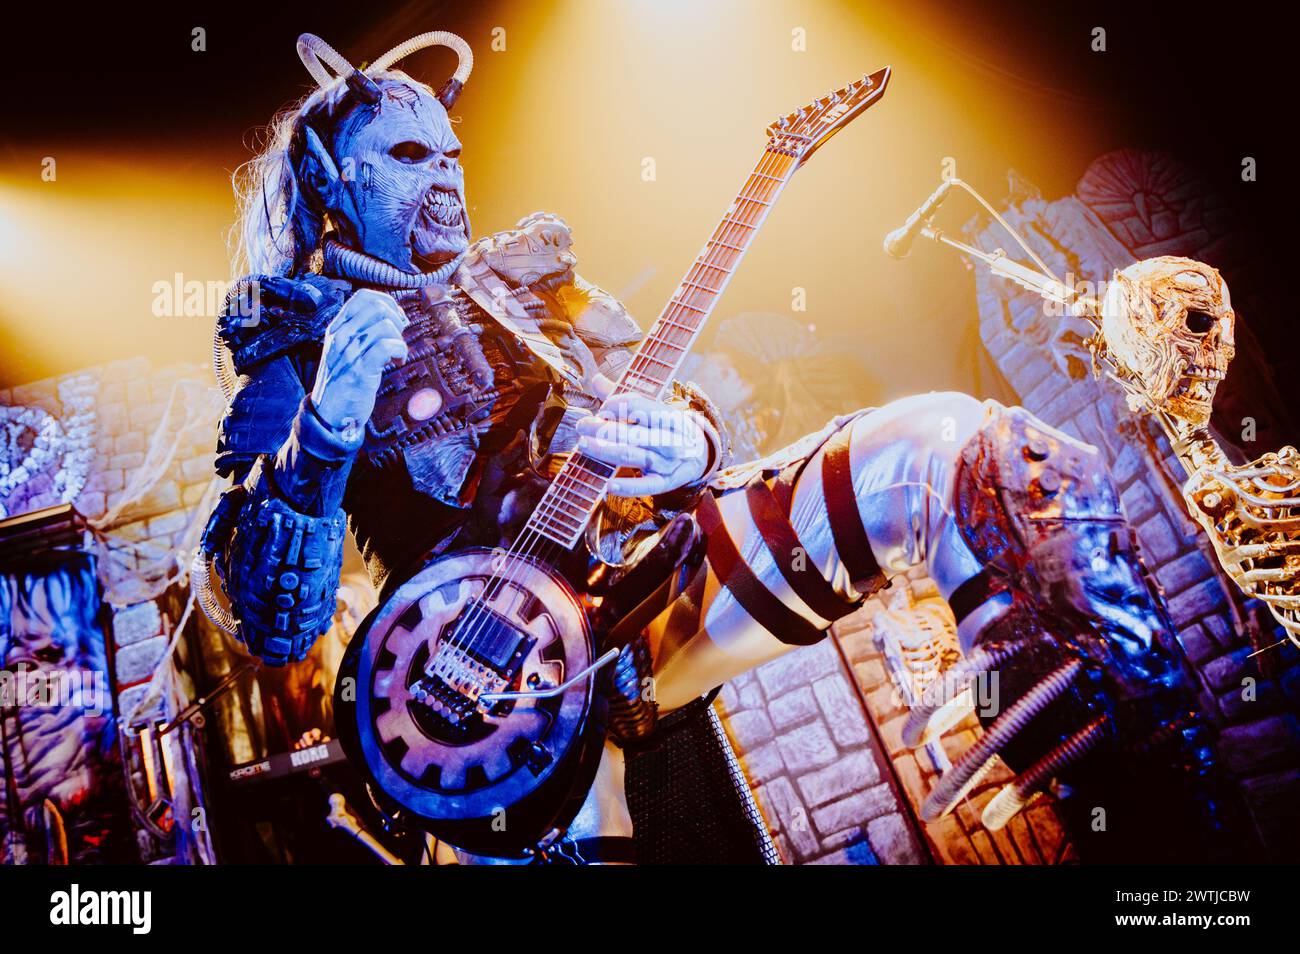 Copenhagen, Denmark. 17th Mar, 2024. The Finnish hard rock band Lordi performs a live concert at Pumpehuset in Copenhagen. Here guitarist Kone is seen live on stage. (Photo Credit: Gonzales Photo/Alamy Live News Stock Photo